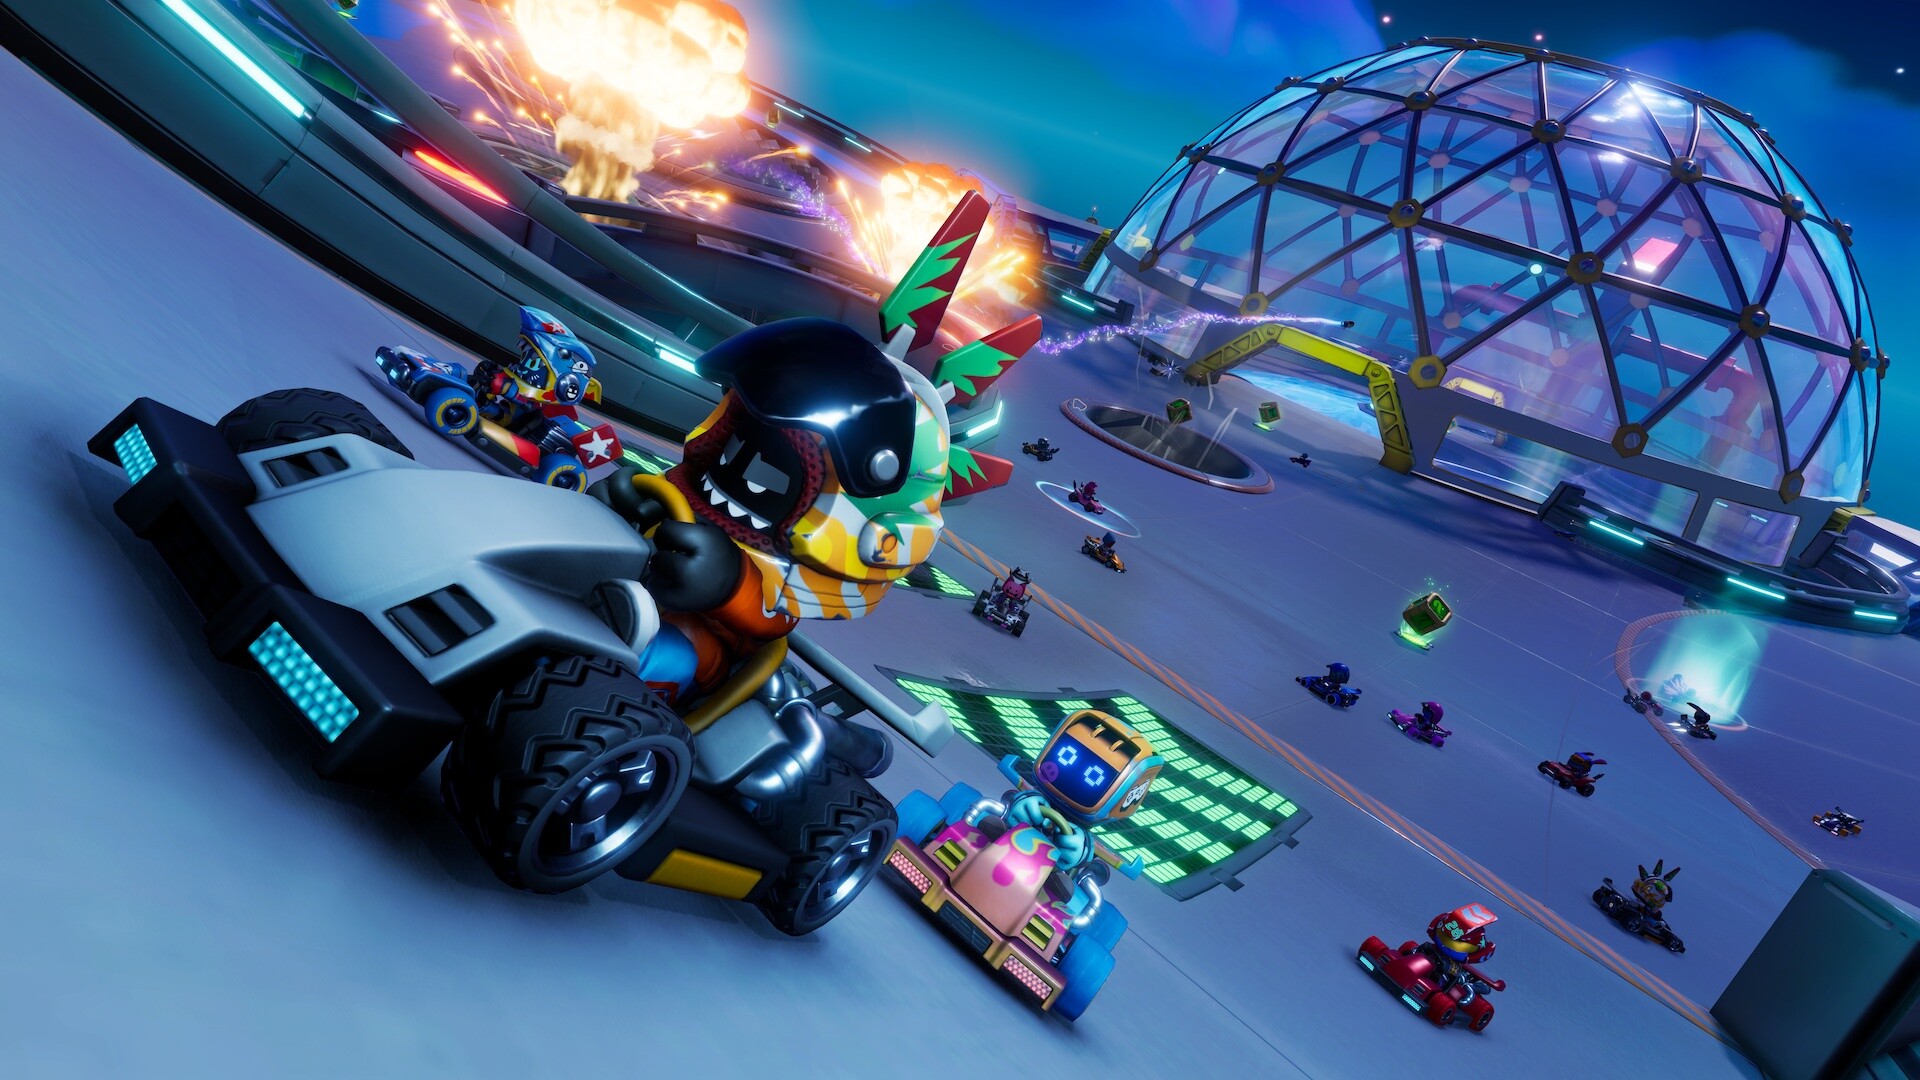 You can play this Mario Kart-style battle royale free now on Steam